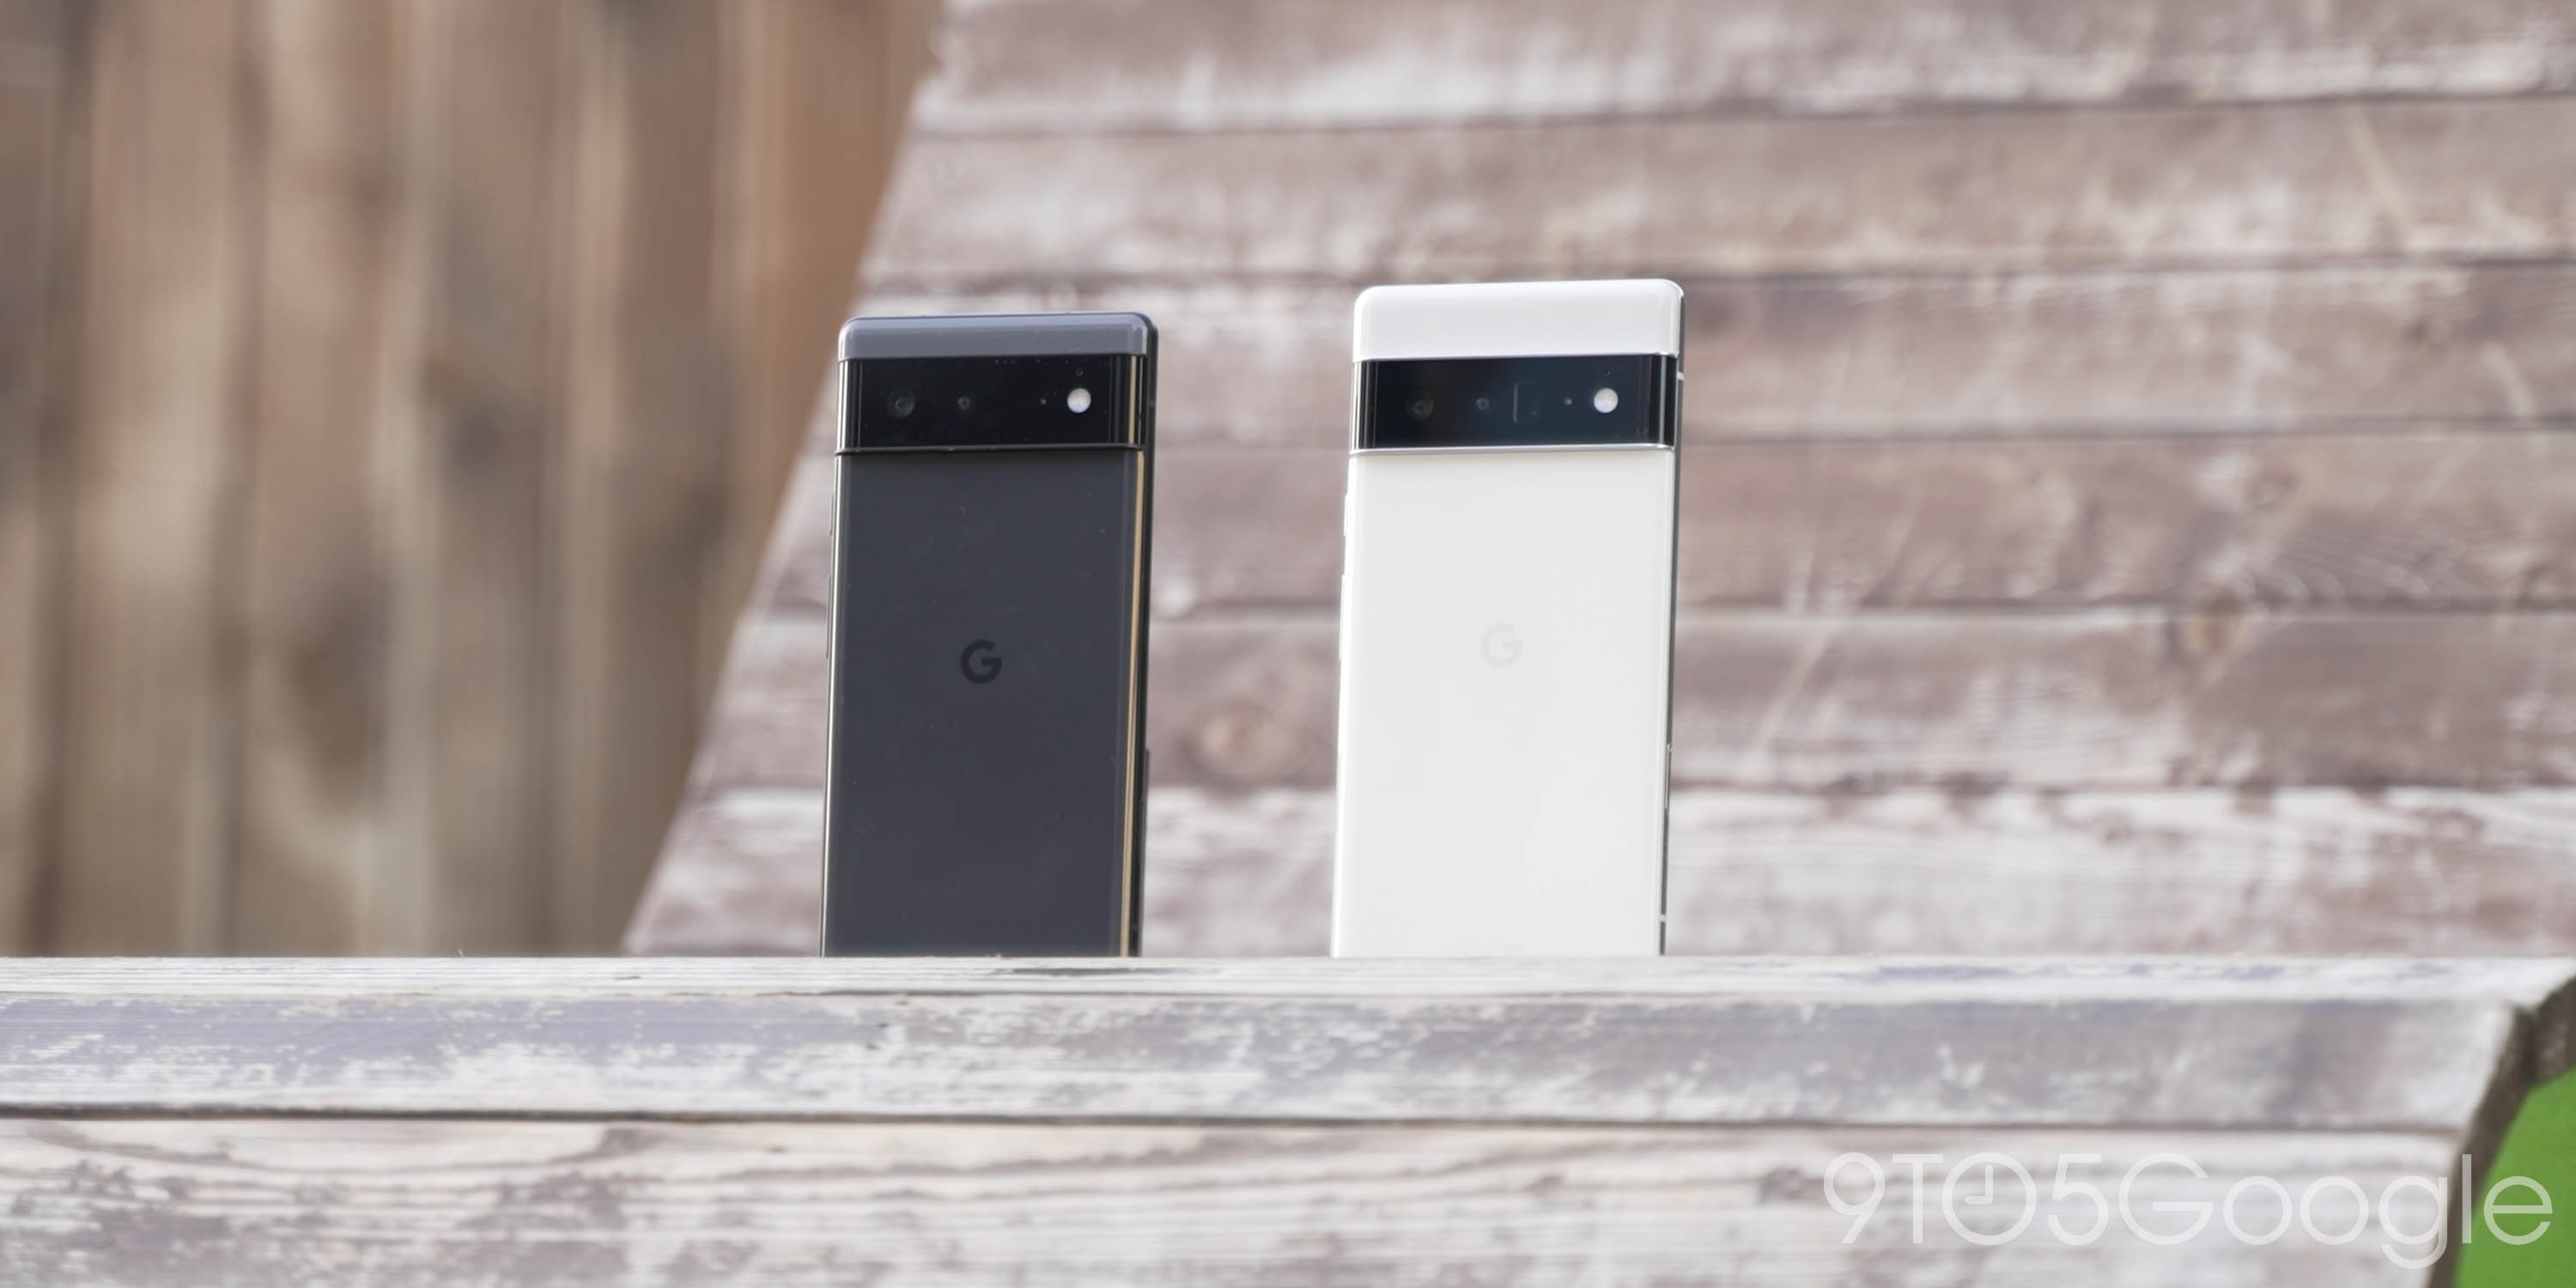 Pixel 6 and 6 Pro models side-by-side